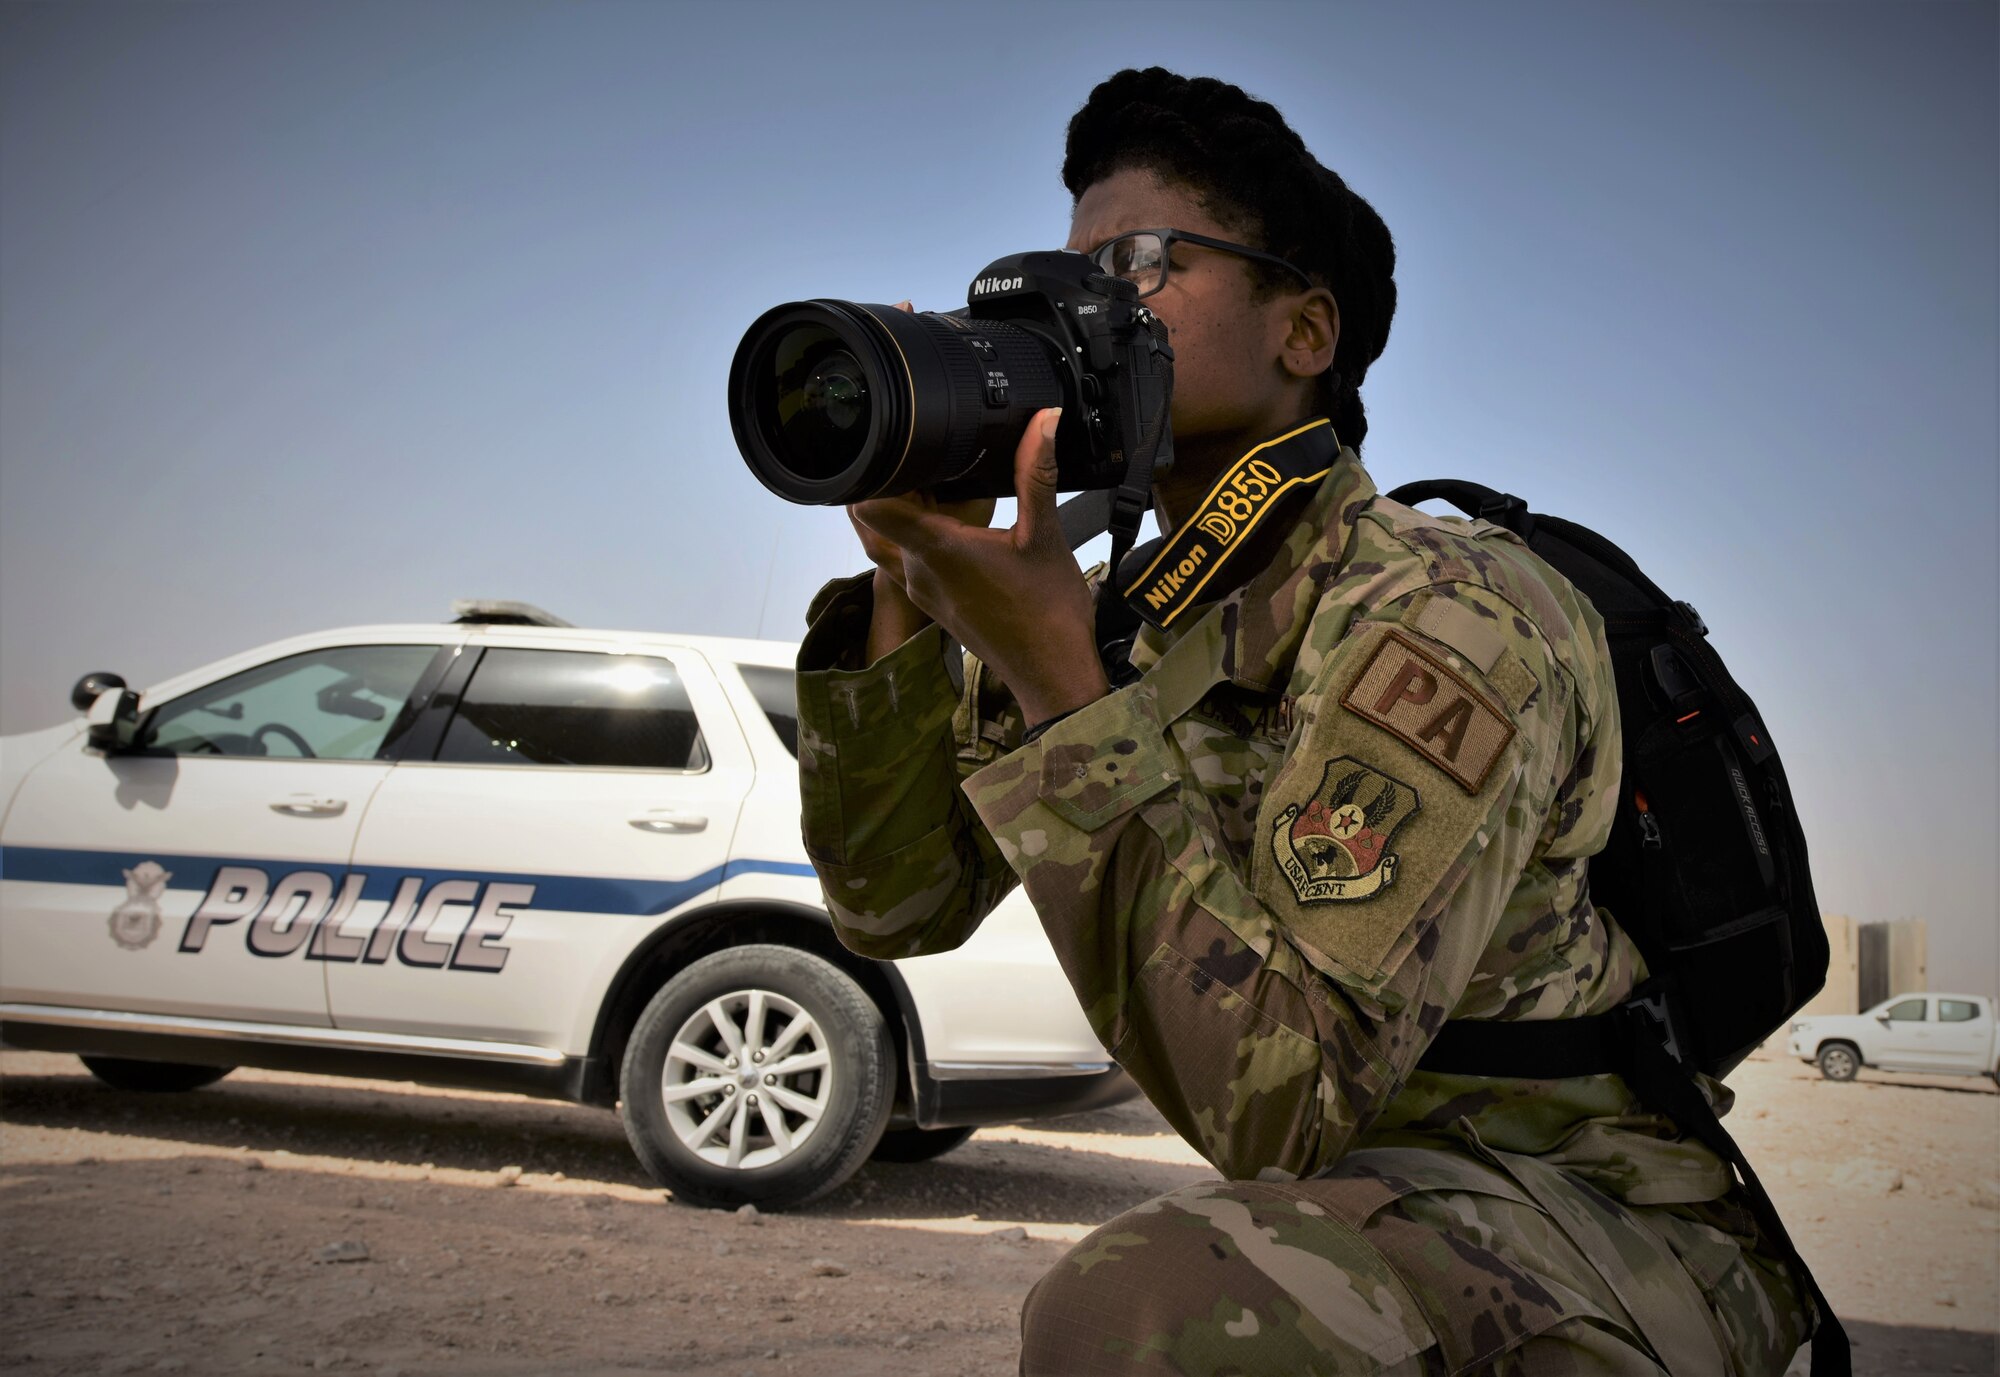 photo of a female military photographer on a knee about to take a photo